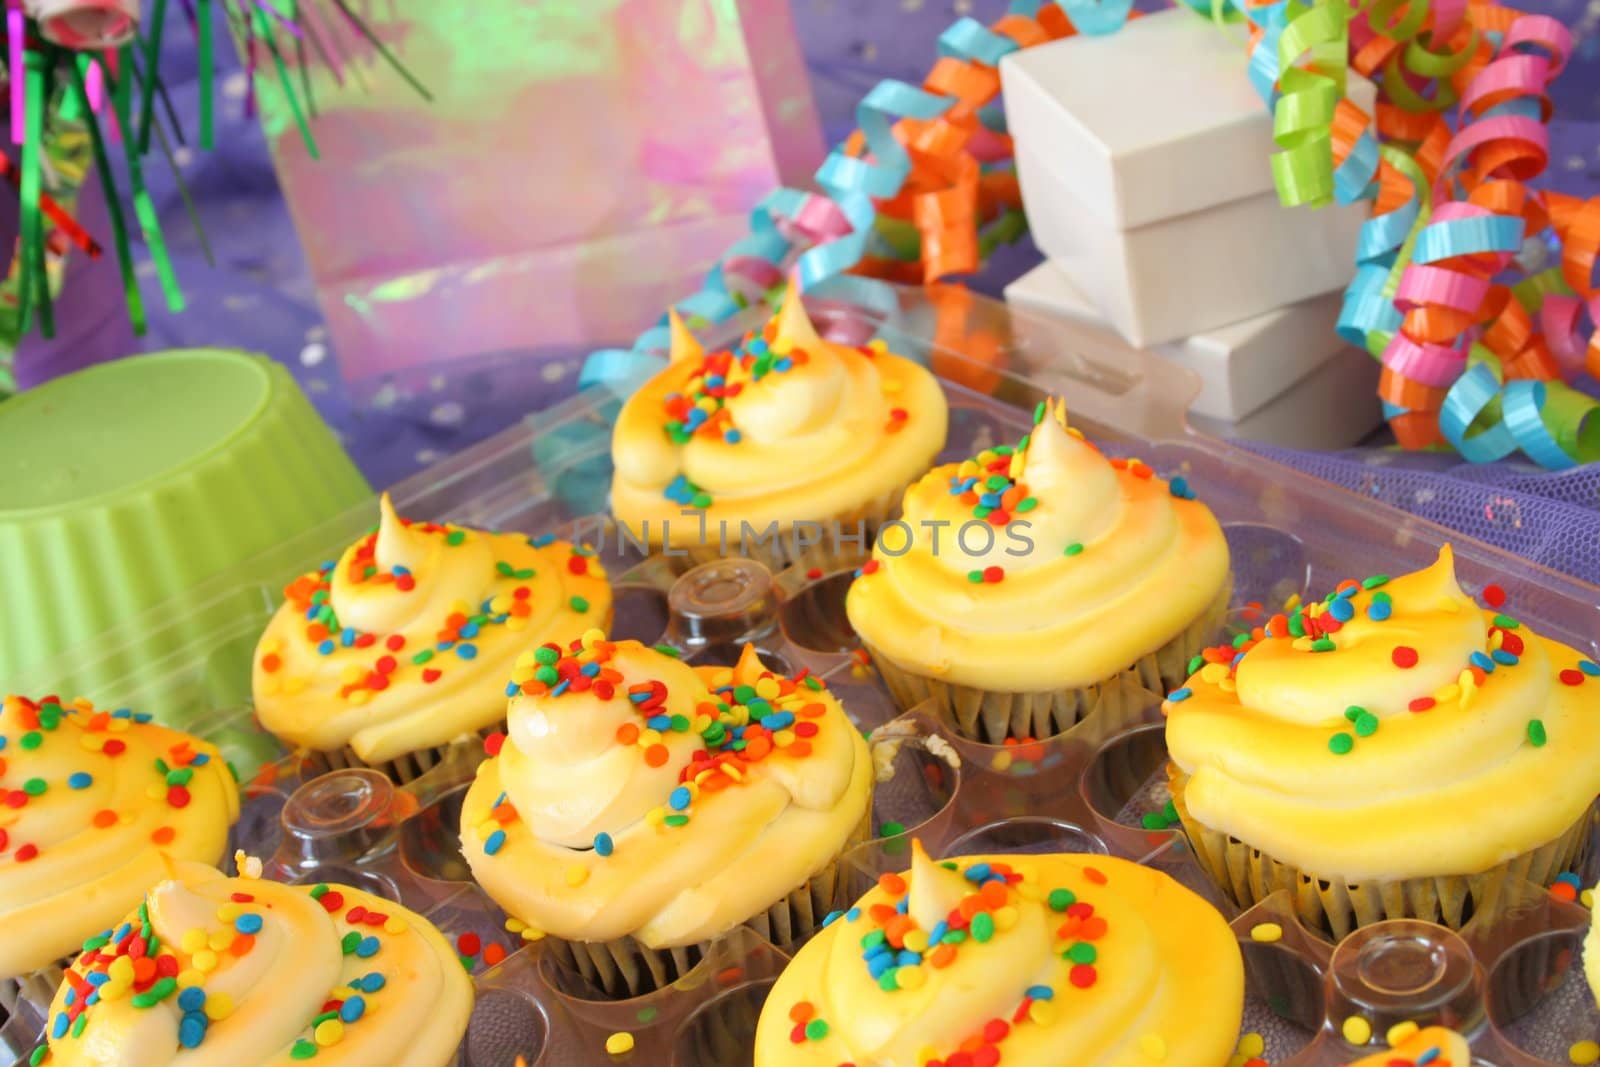 A grouping of beautifully colored cup cakes with sprinkles and party supplies.  Used a shallow DOF and selective focus.